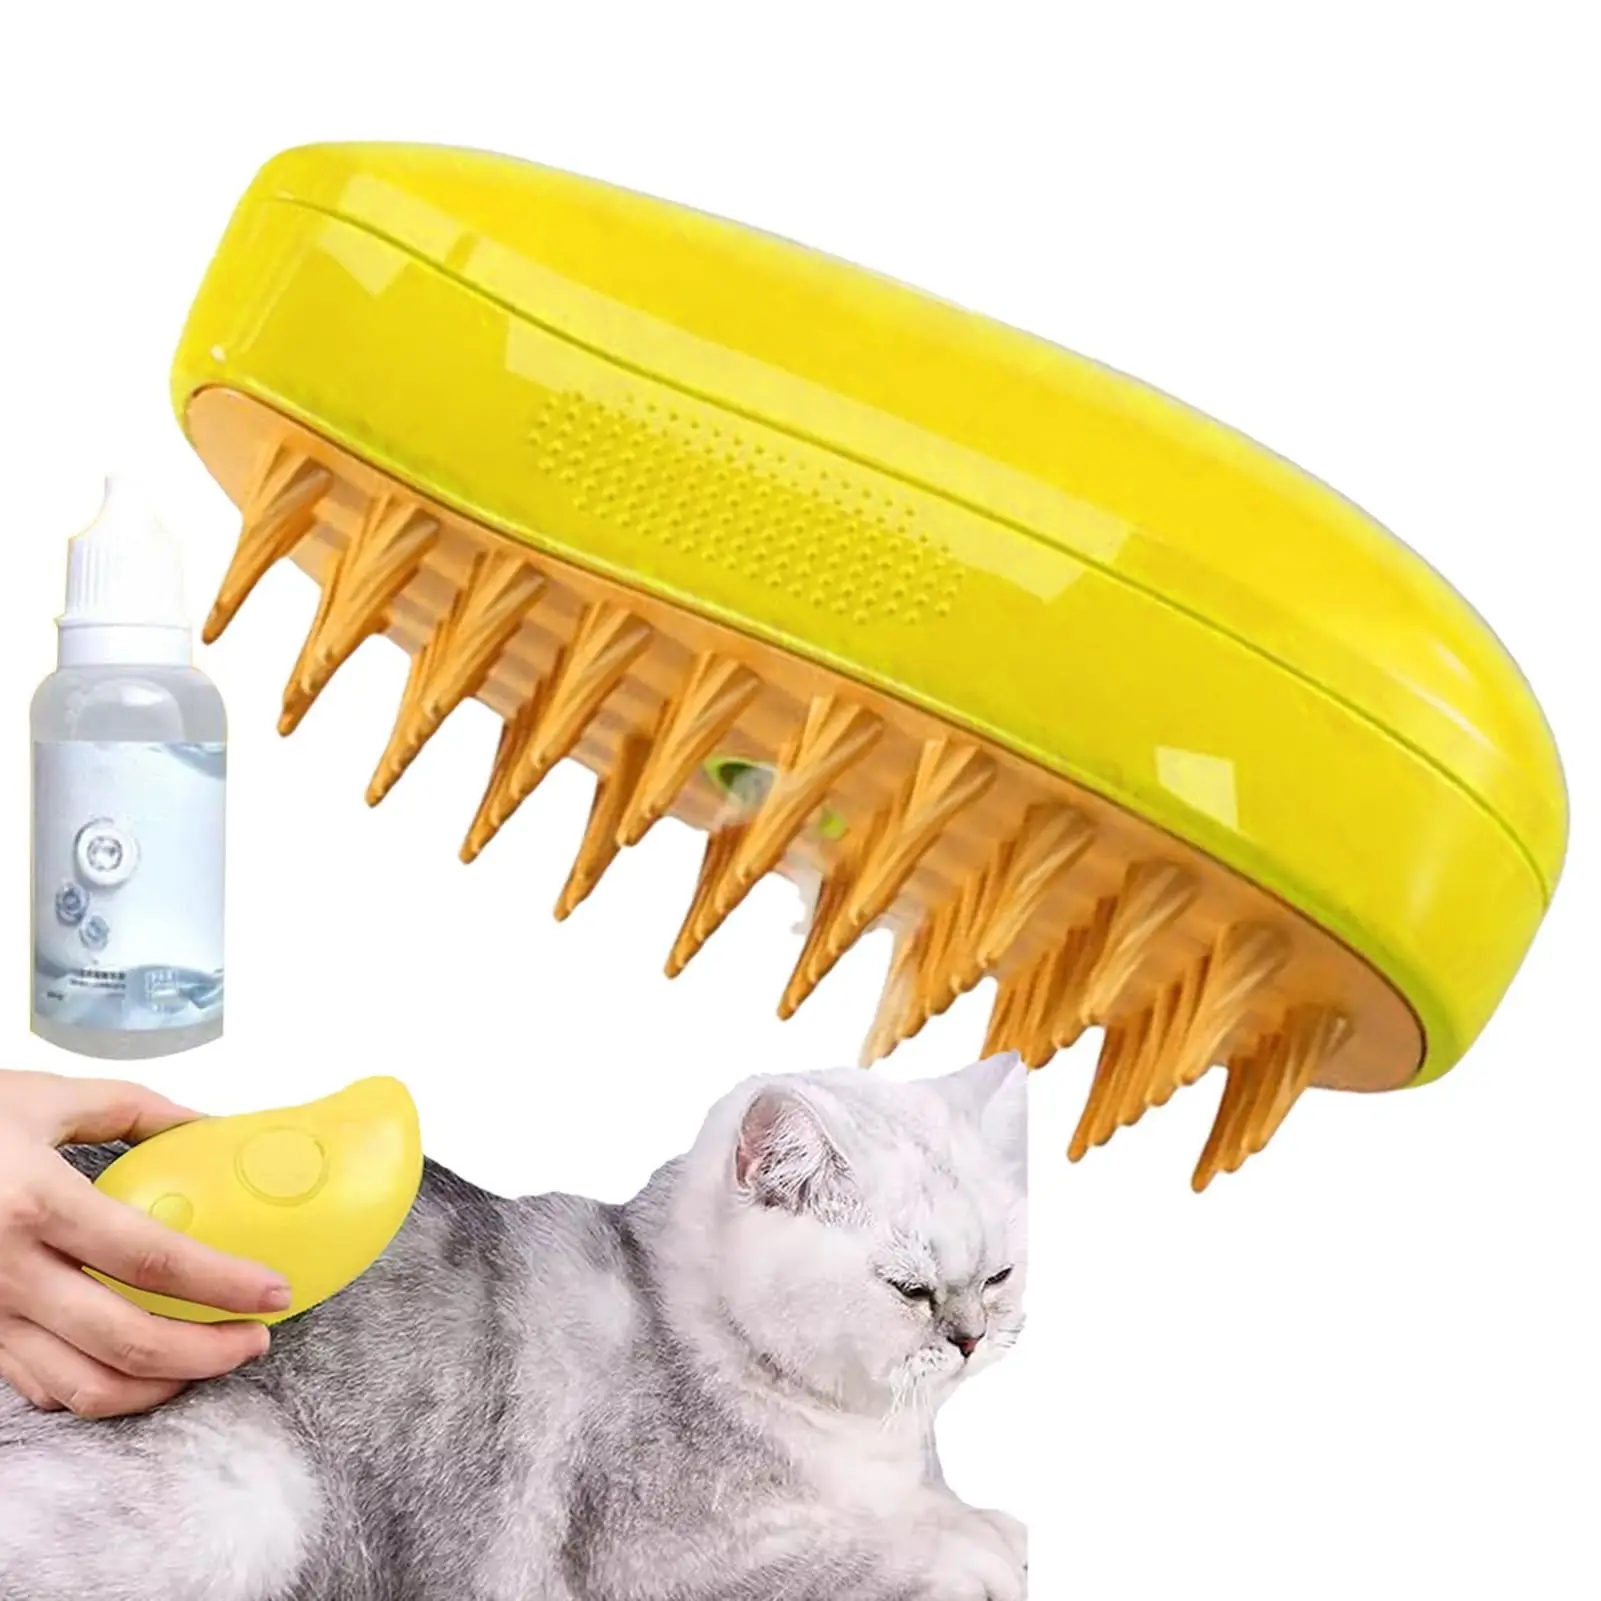 

Handheld Hair Steamer With Pet Spray Massage Comb For Removing Tangled And Loosse Hair Christmas Gift For Animal Cat Dog